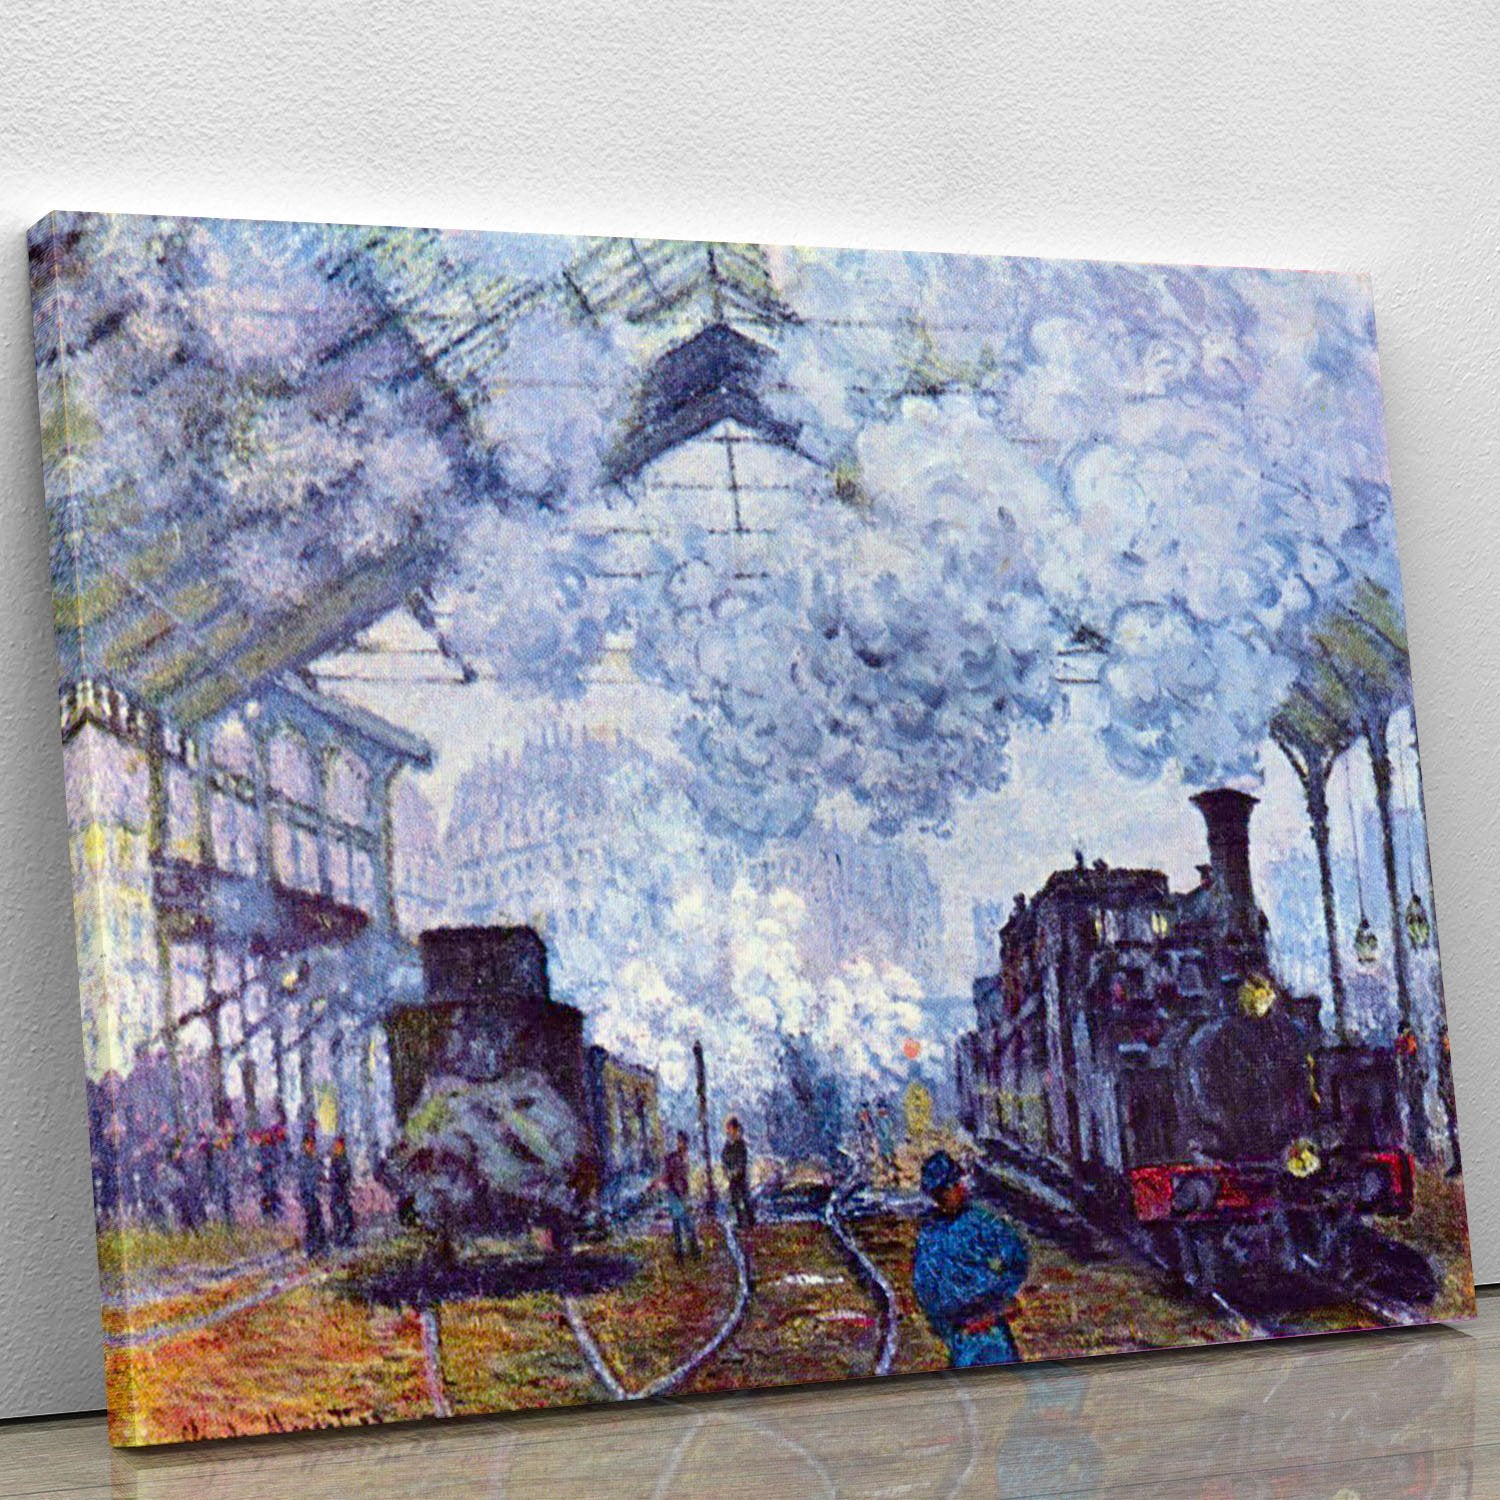 Saint Lazare station in Paris arrival of a train by Monet Canvas Print or Poster